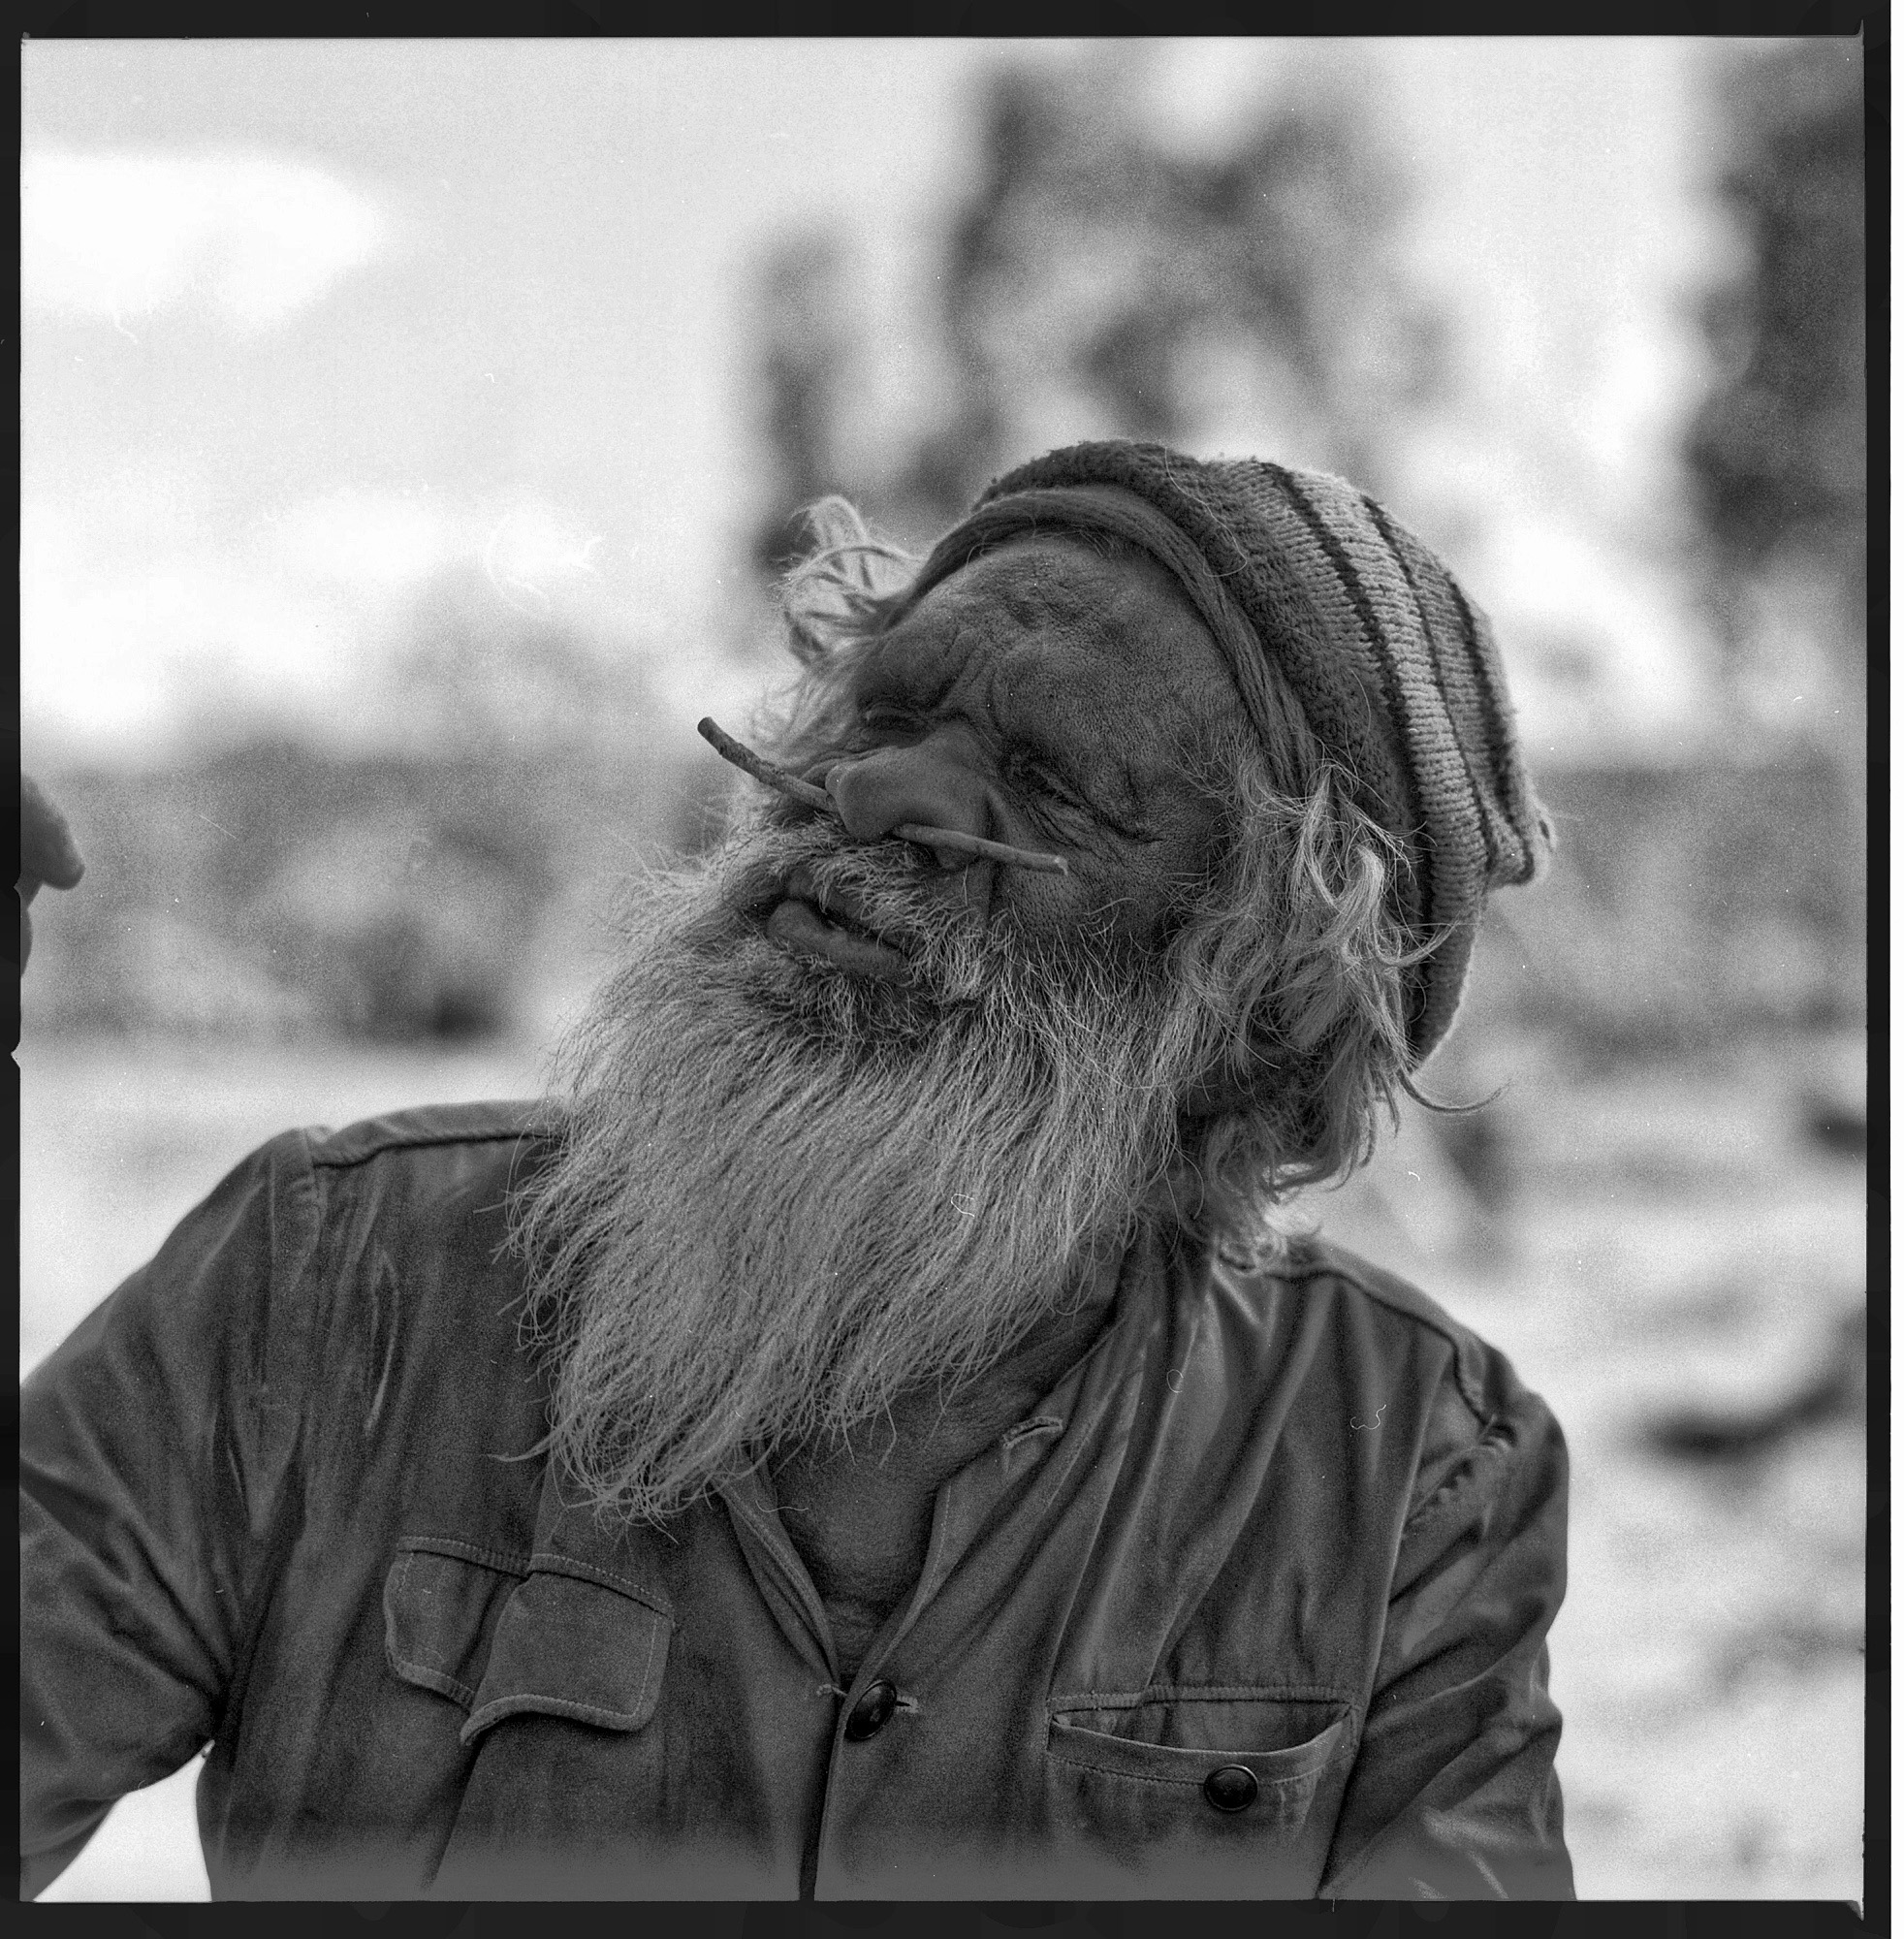 Portrait Photography Aboriginals - 'Time travellers along the